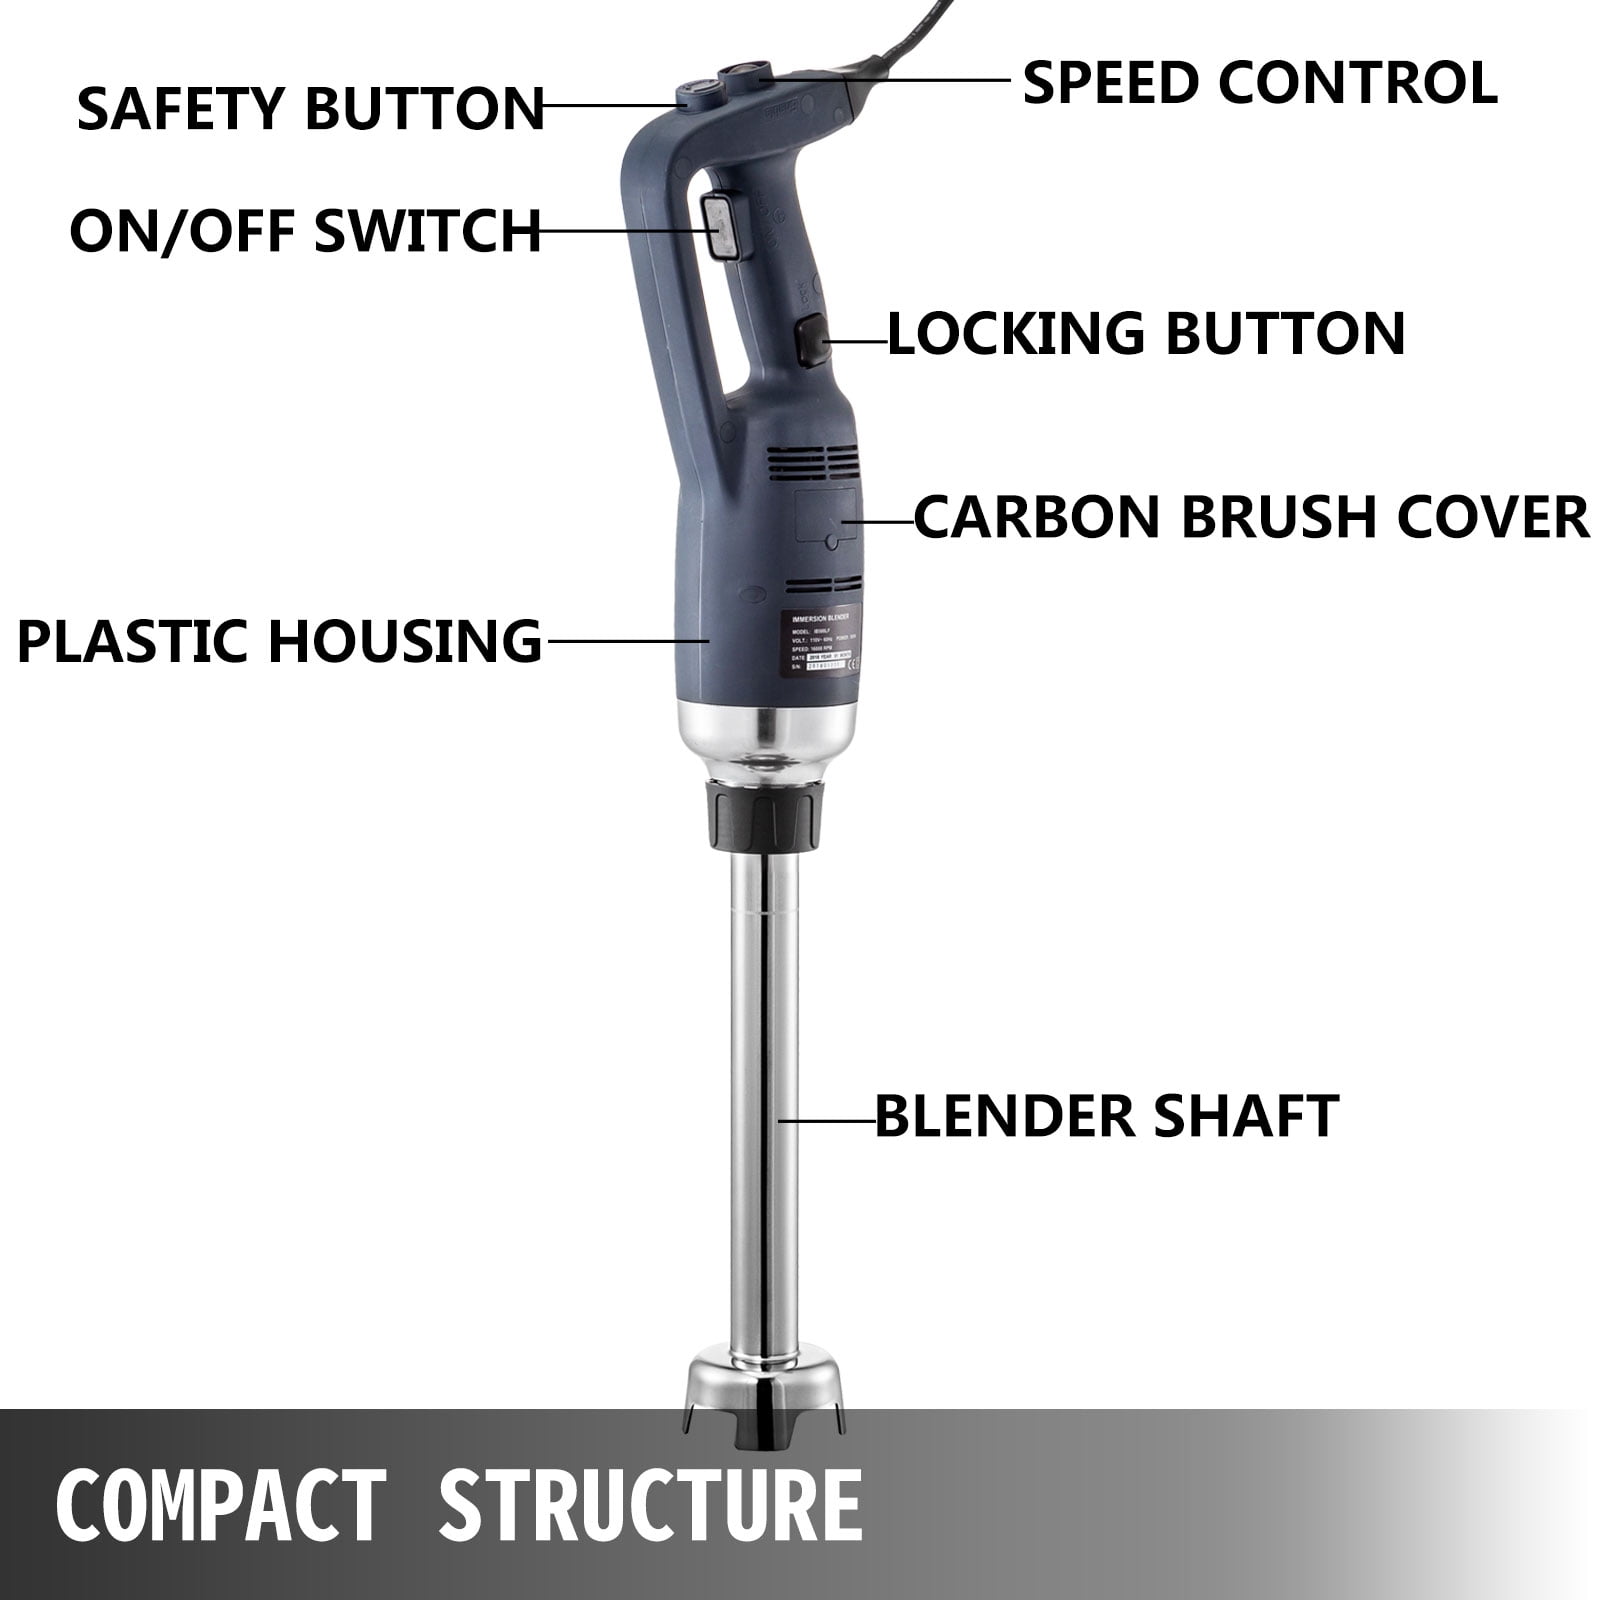 GZZT 350W Immersion Blender Handheld Mixer Commercial Food